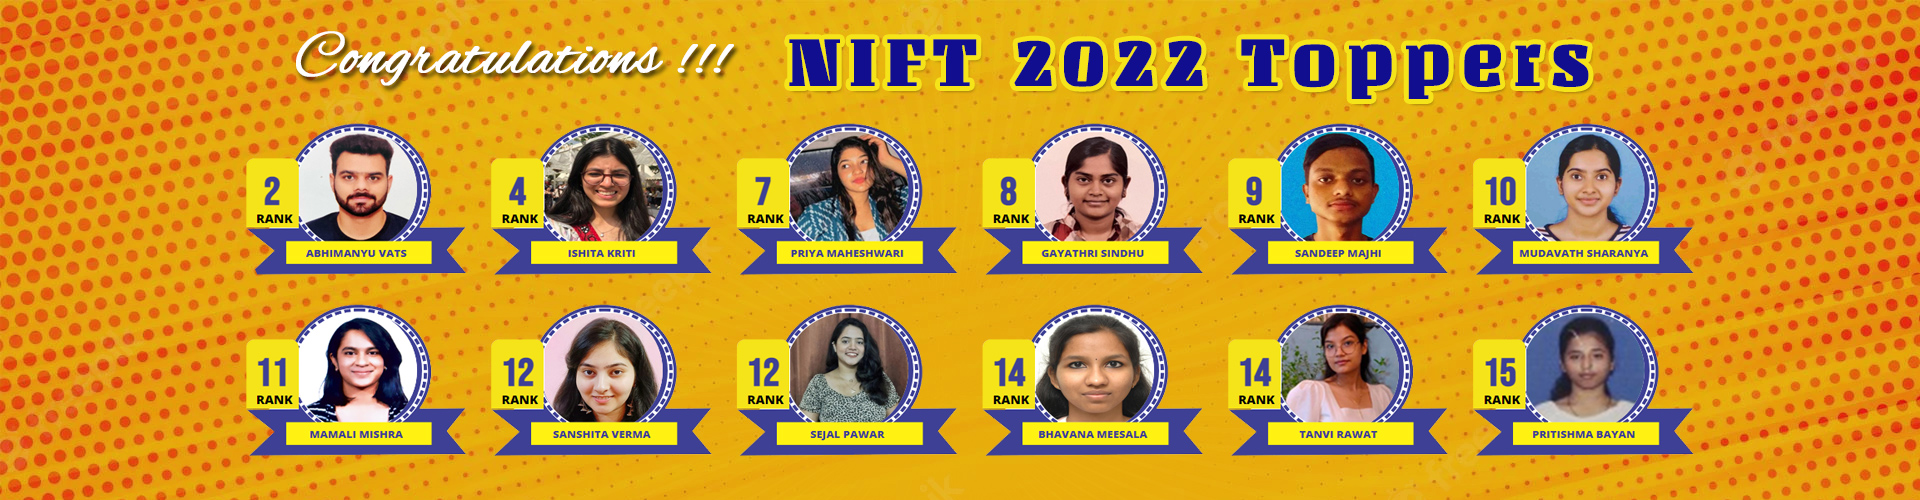 nift 2022 toppers